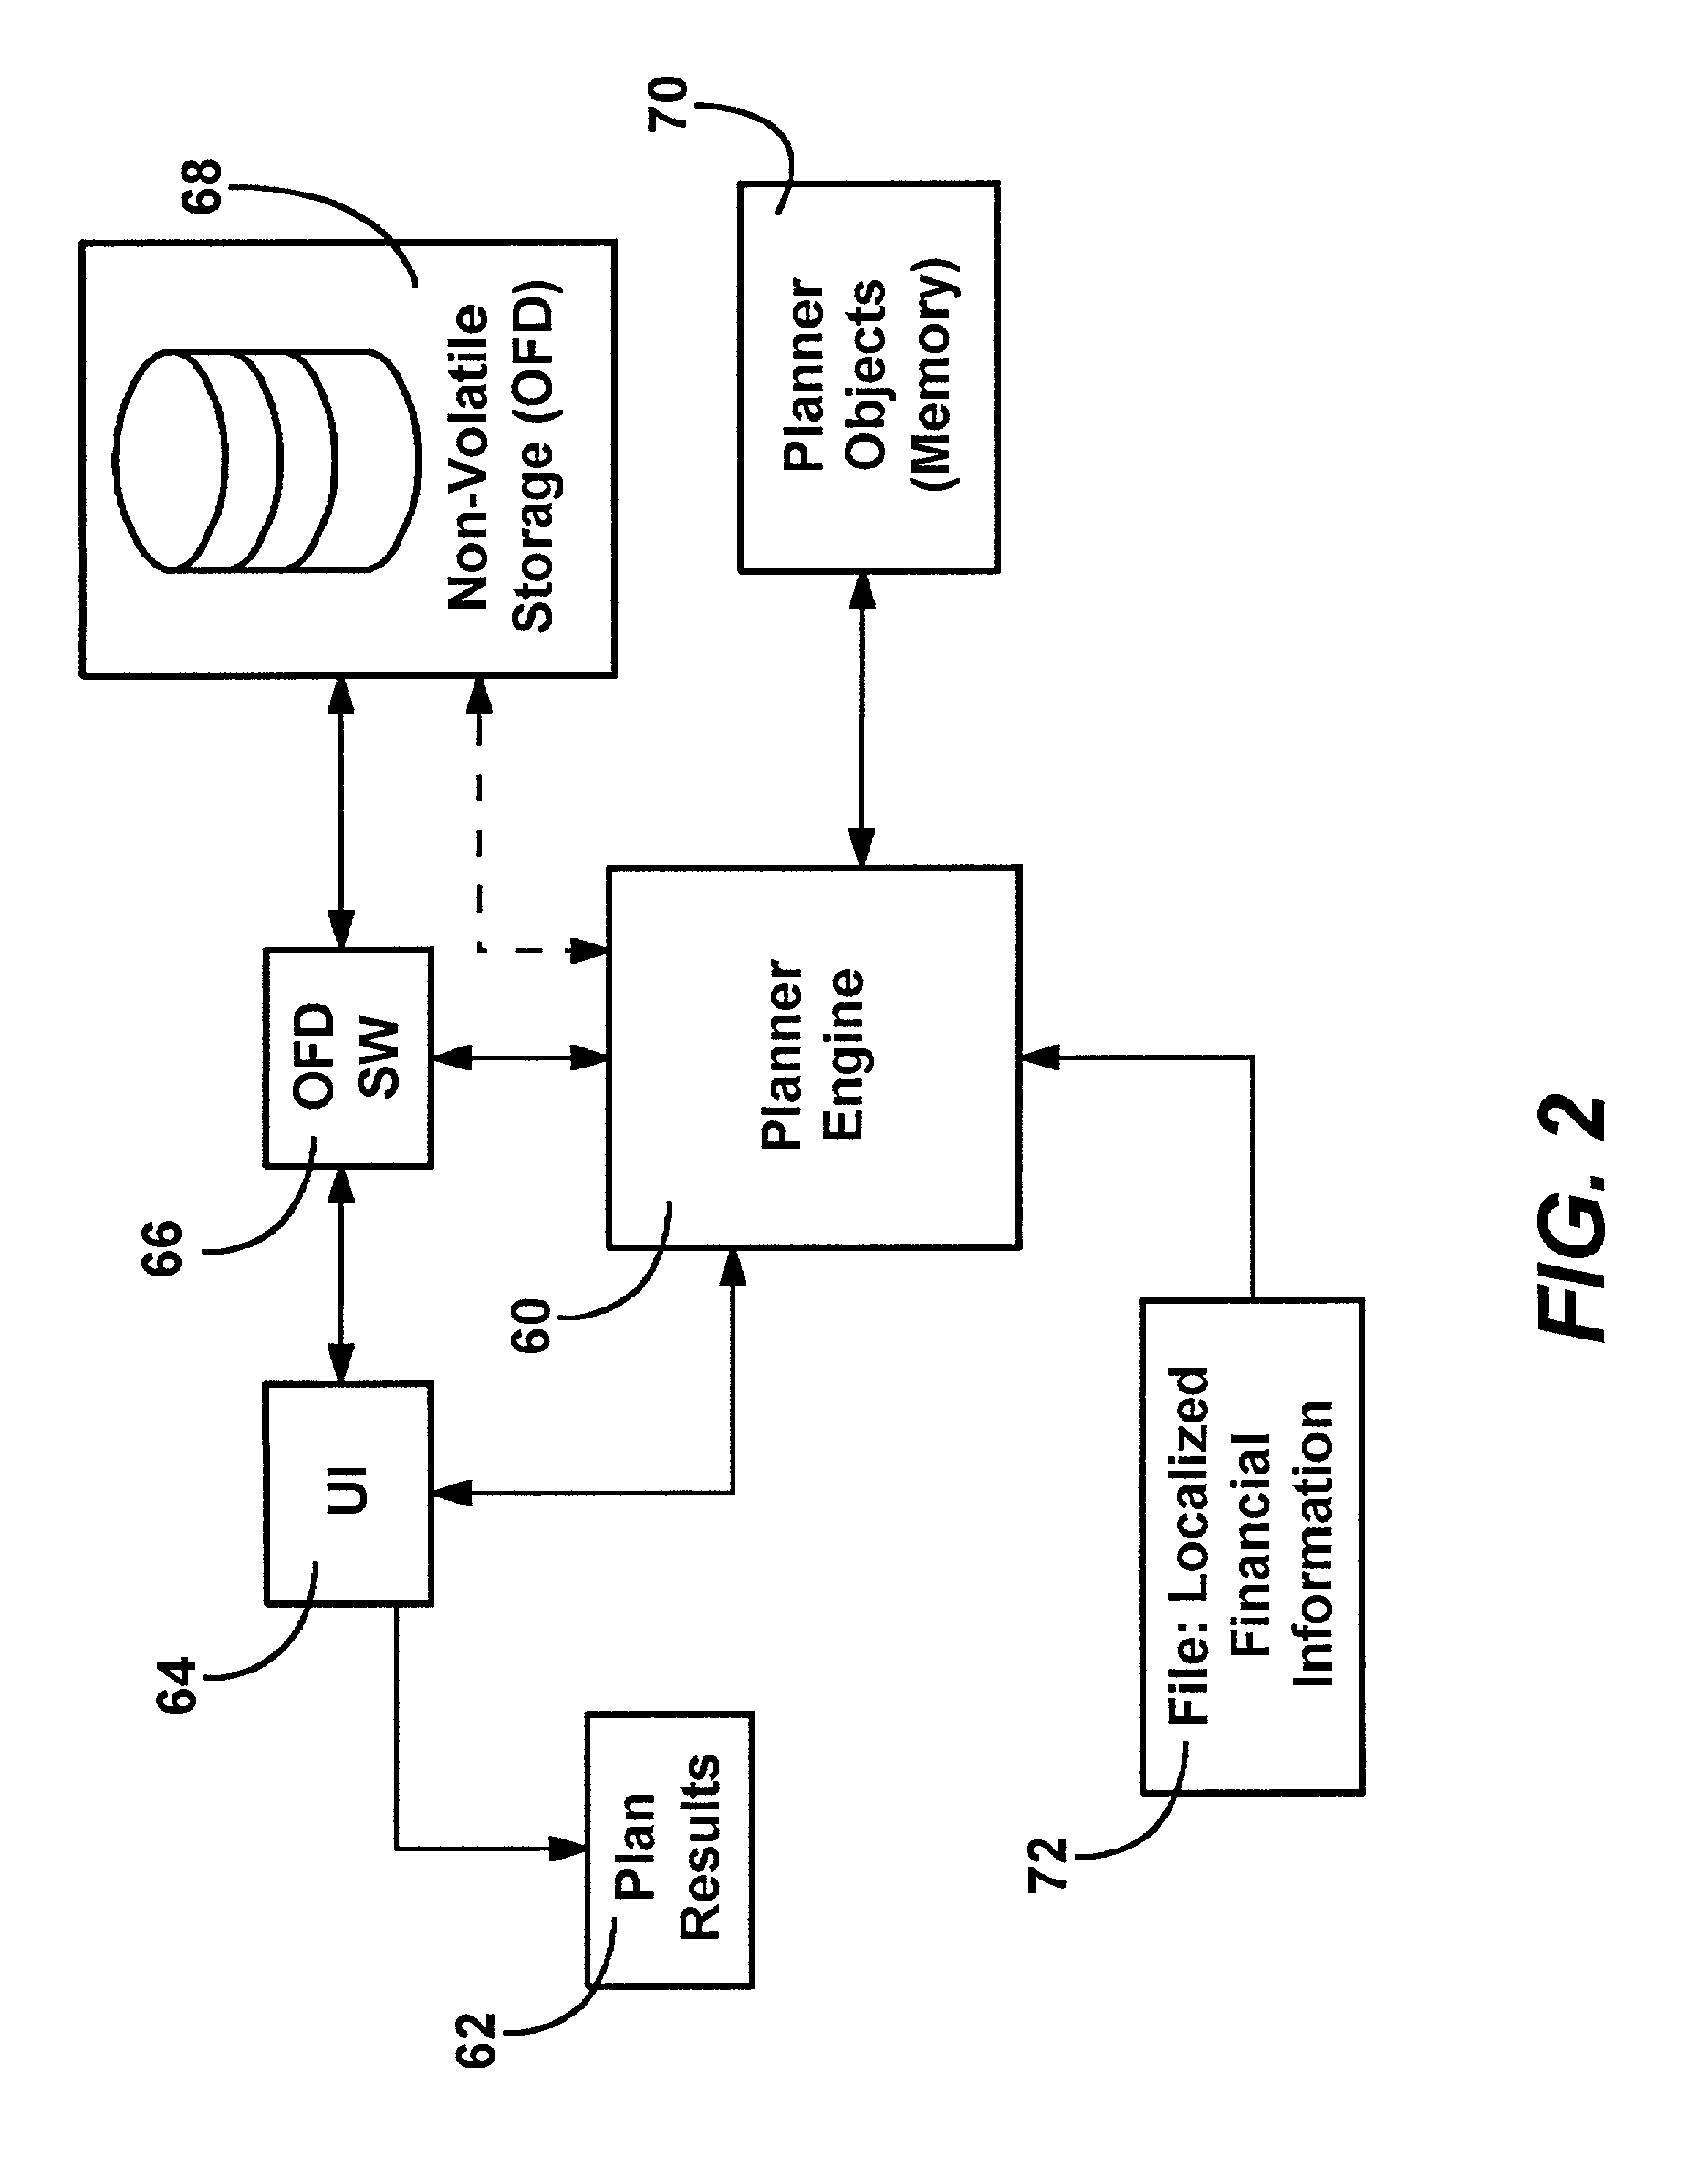 Method and system for representing dependencies in a financial plan